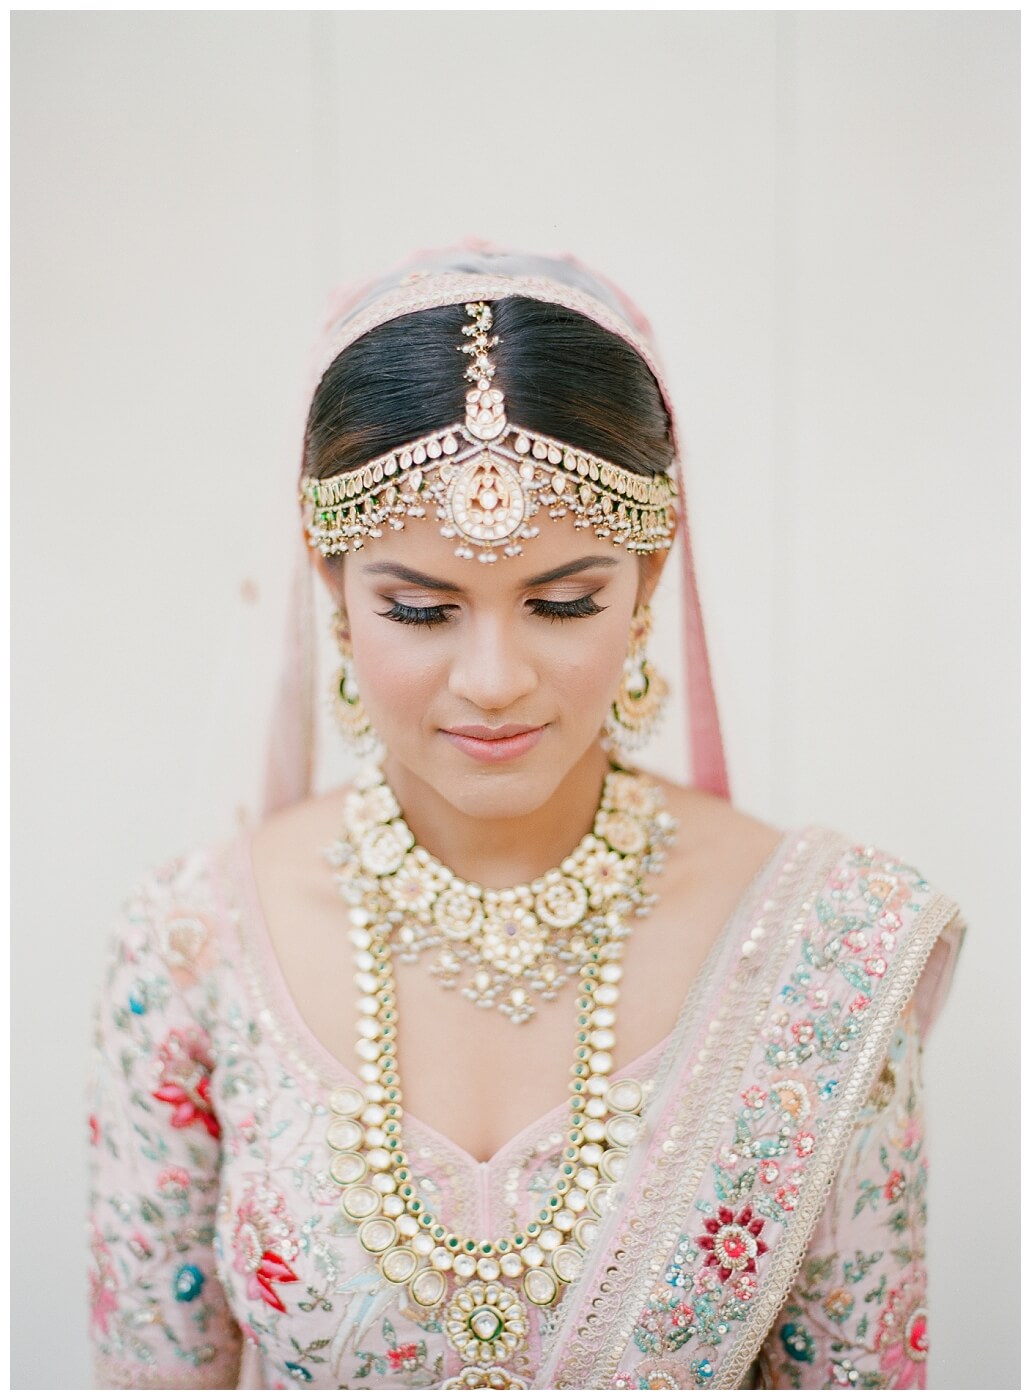 San Diego Indian Wedding Photographer multi day event baraat and sangeet